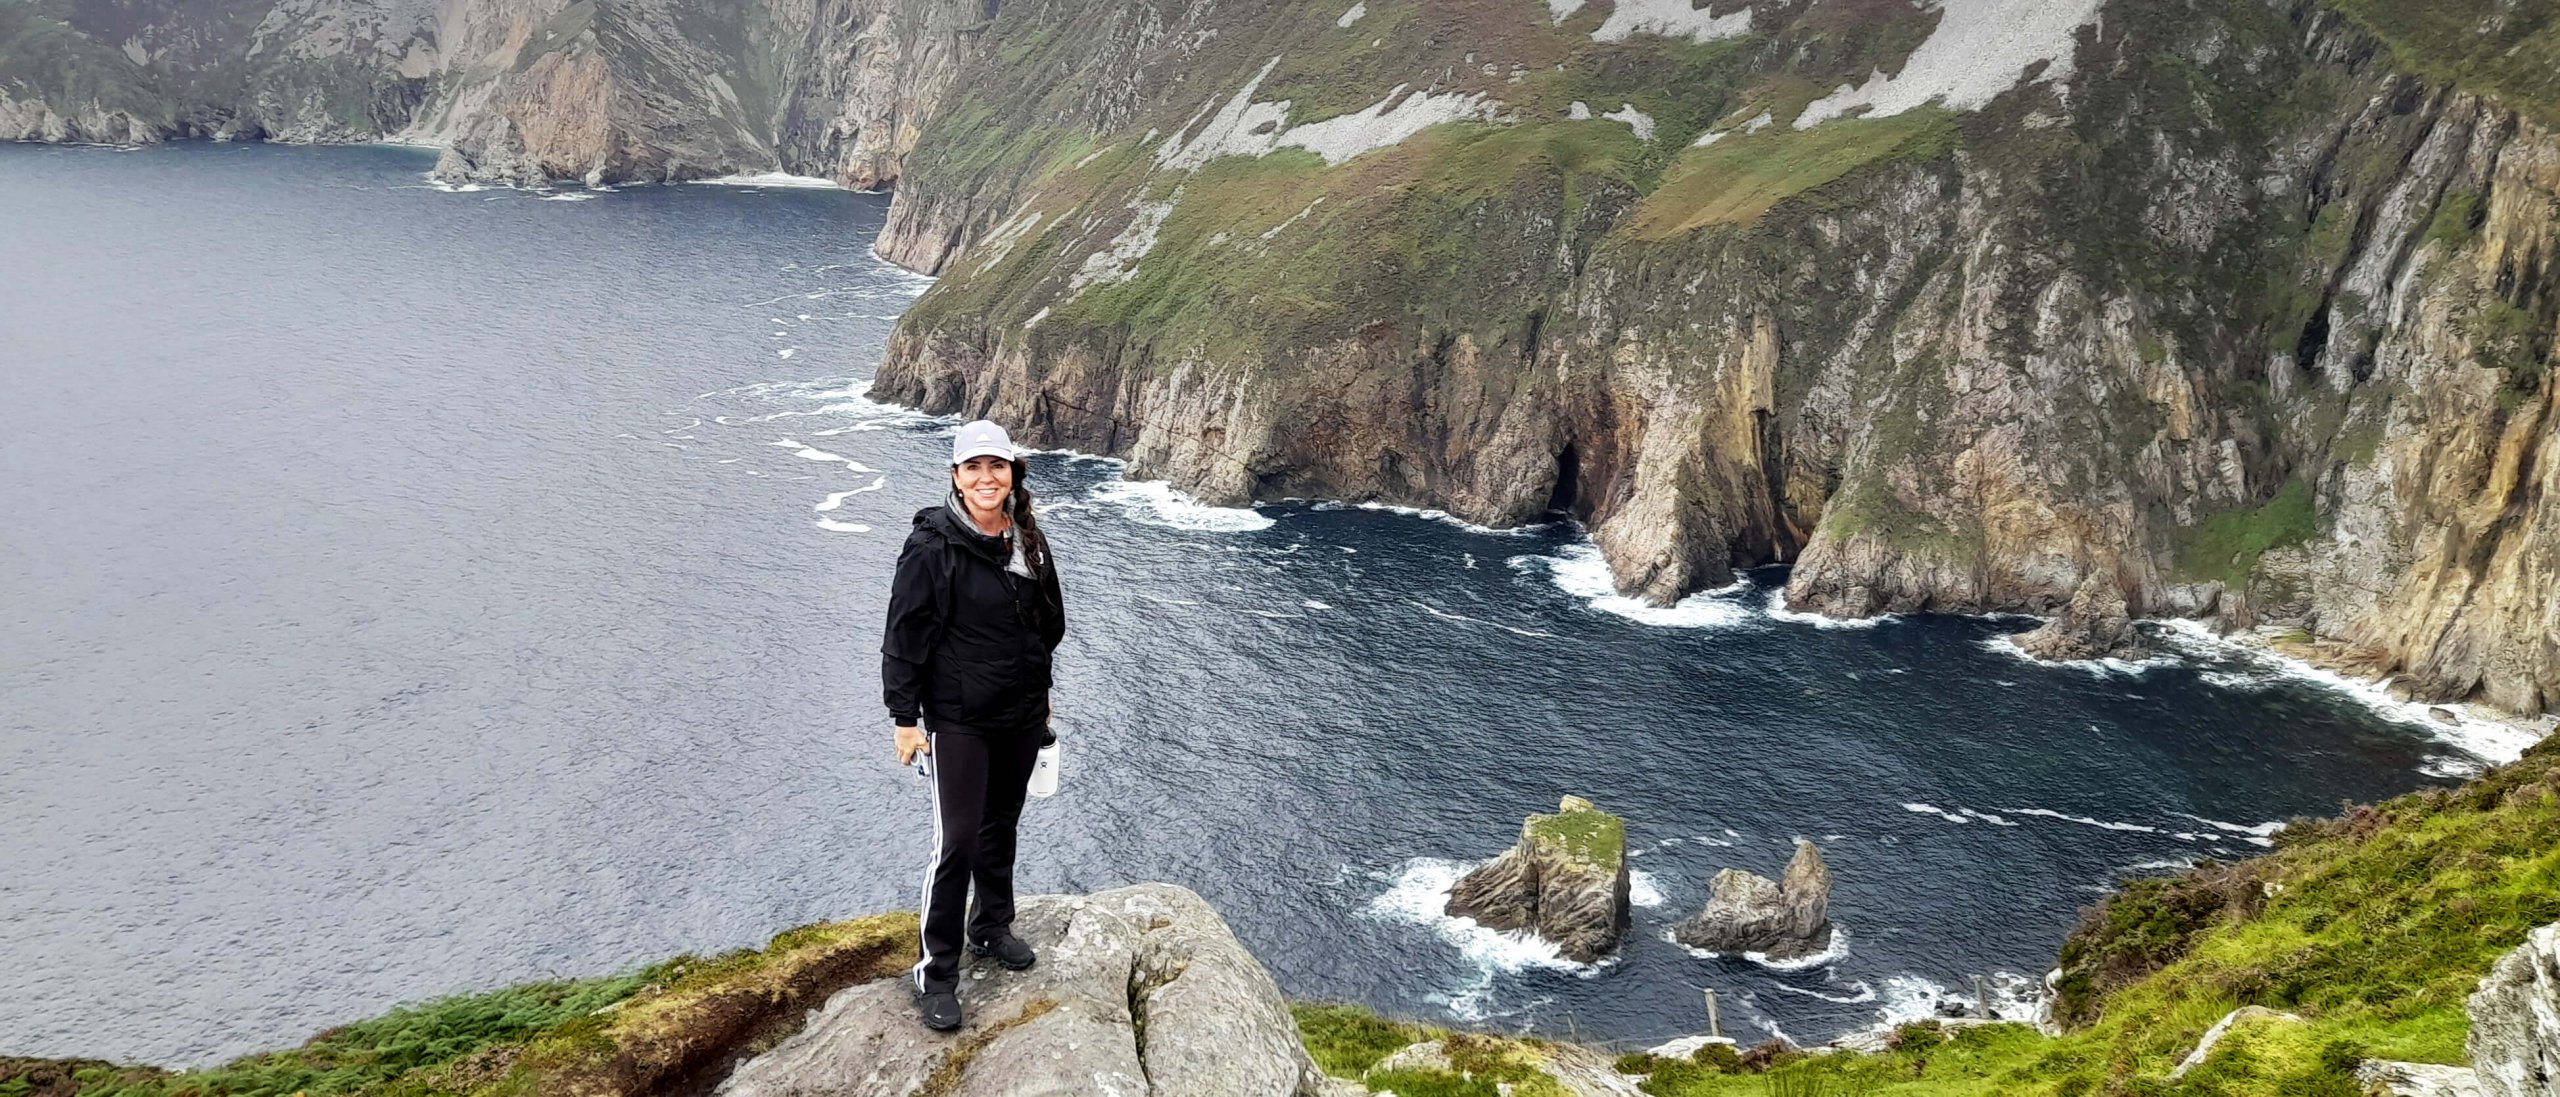 Tour guest poses above sea cliffs in Donegal, Ireland